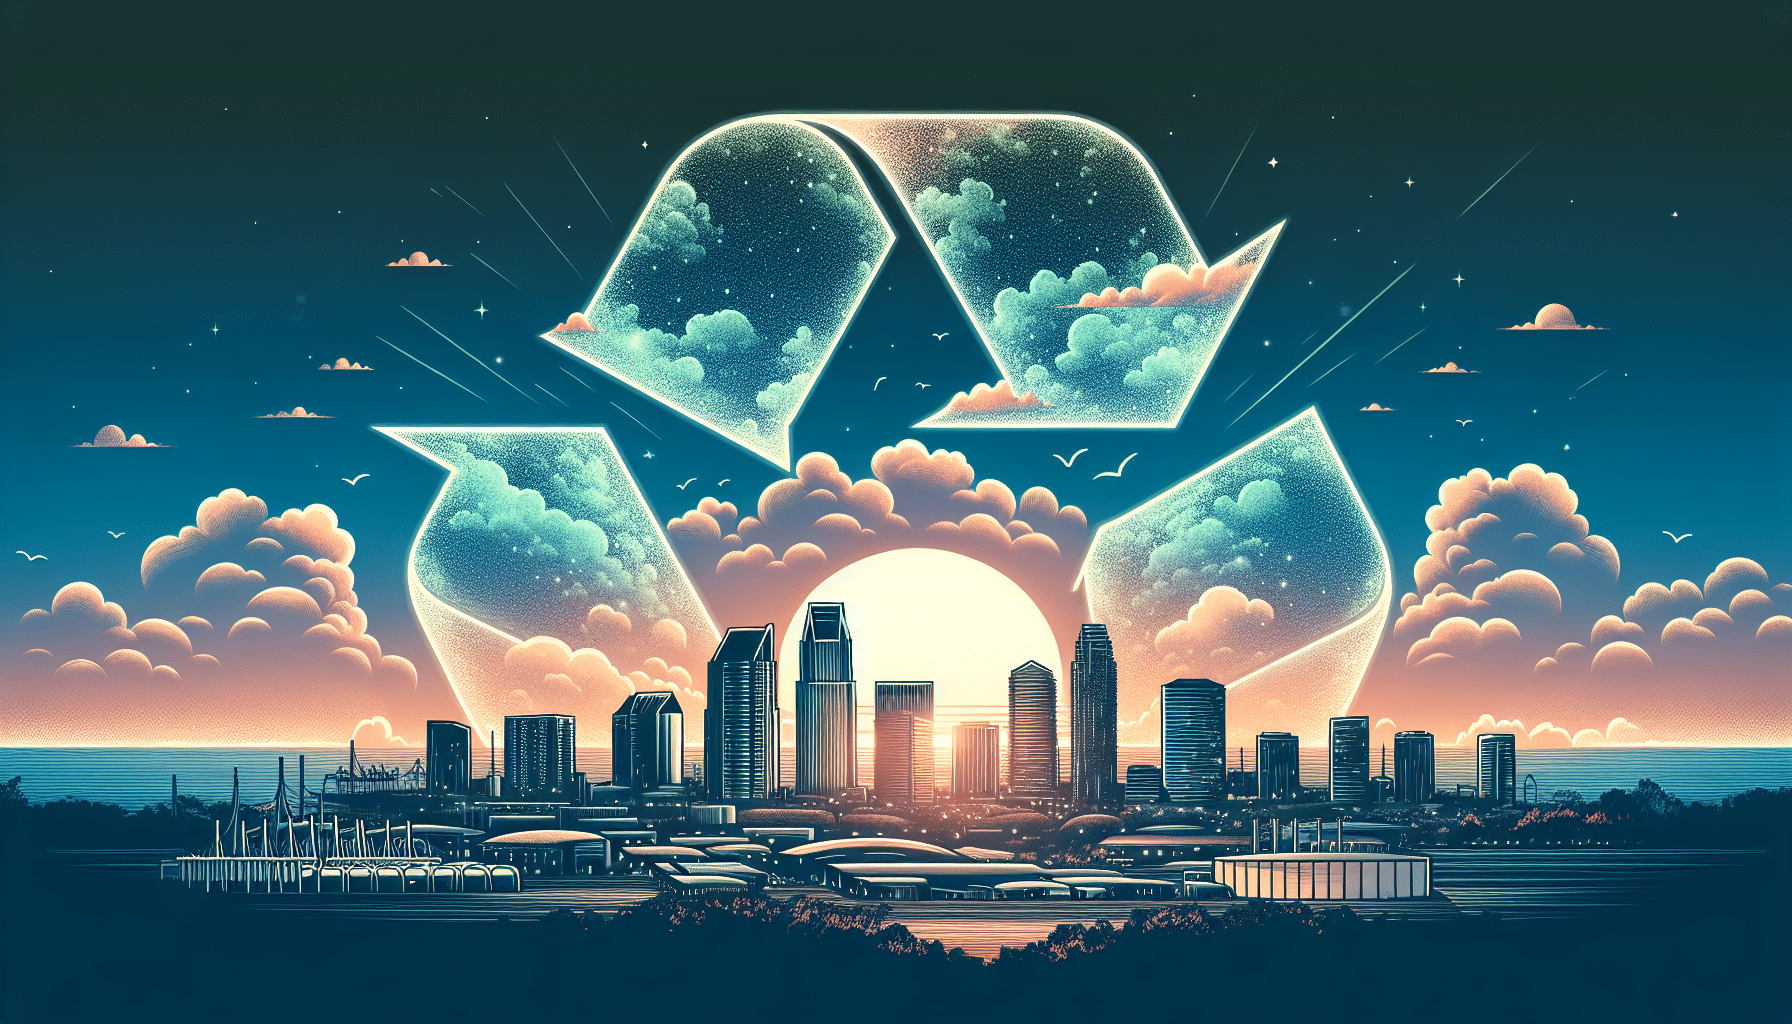 Illustration of a city skyline with recycling symbols in the background